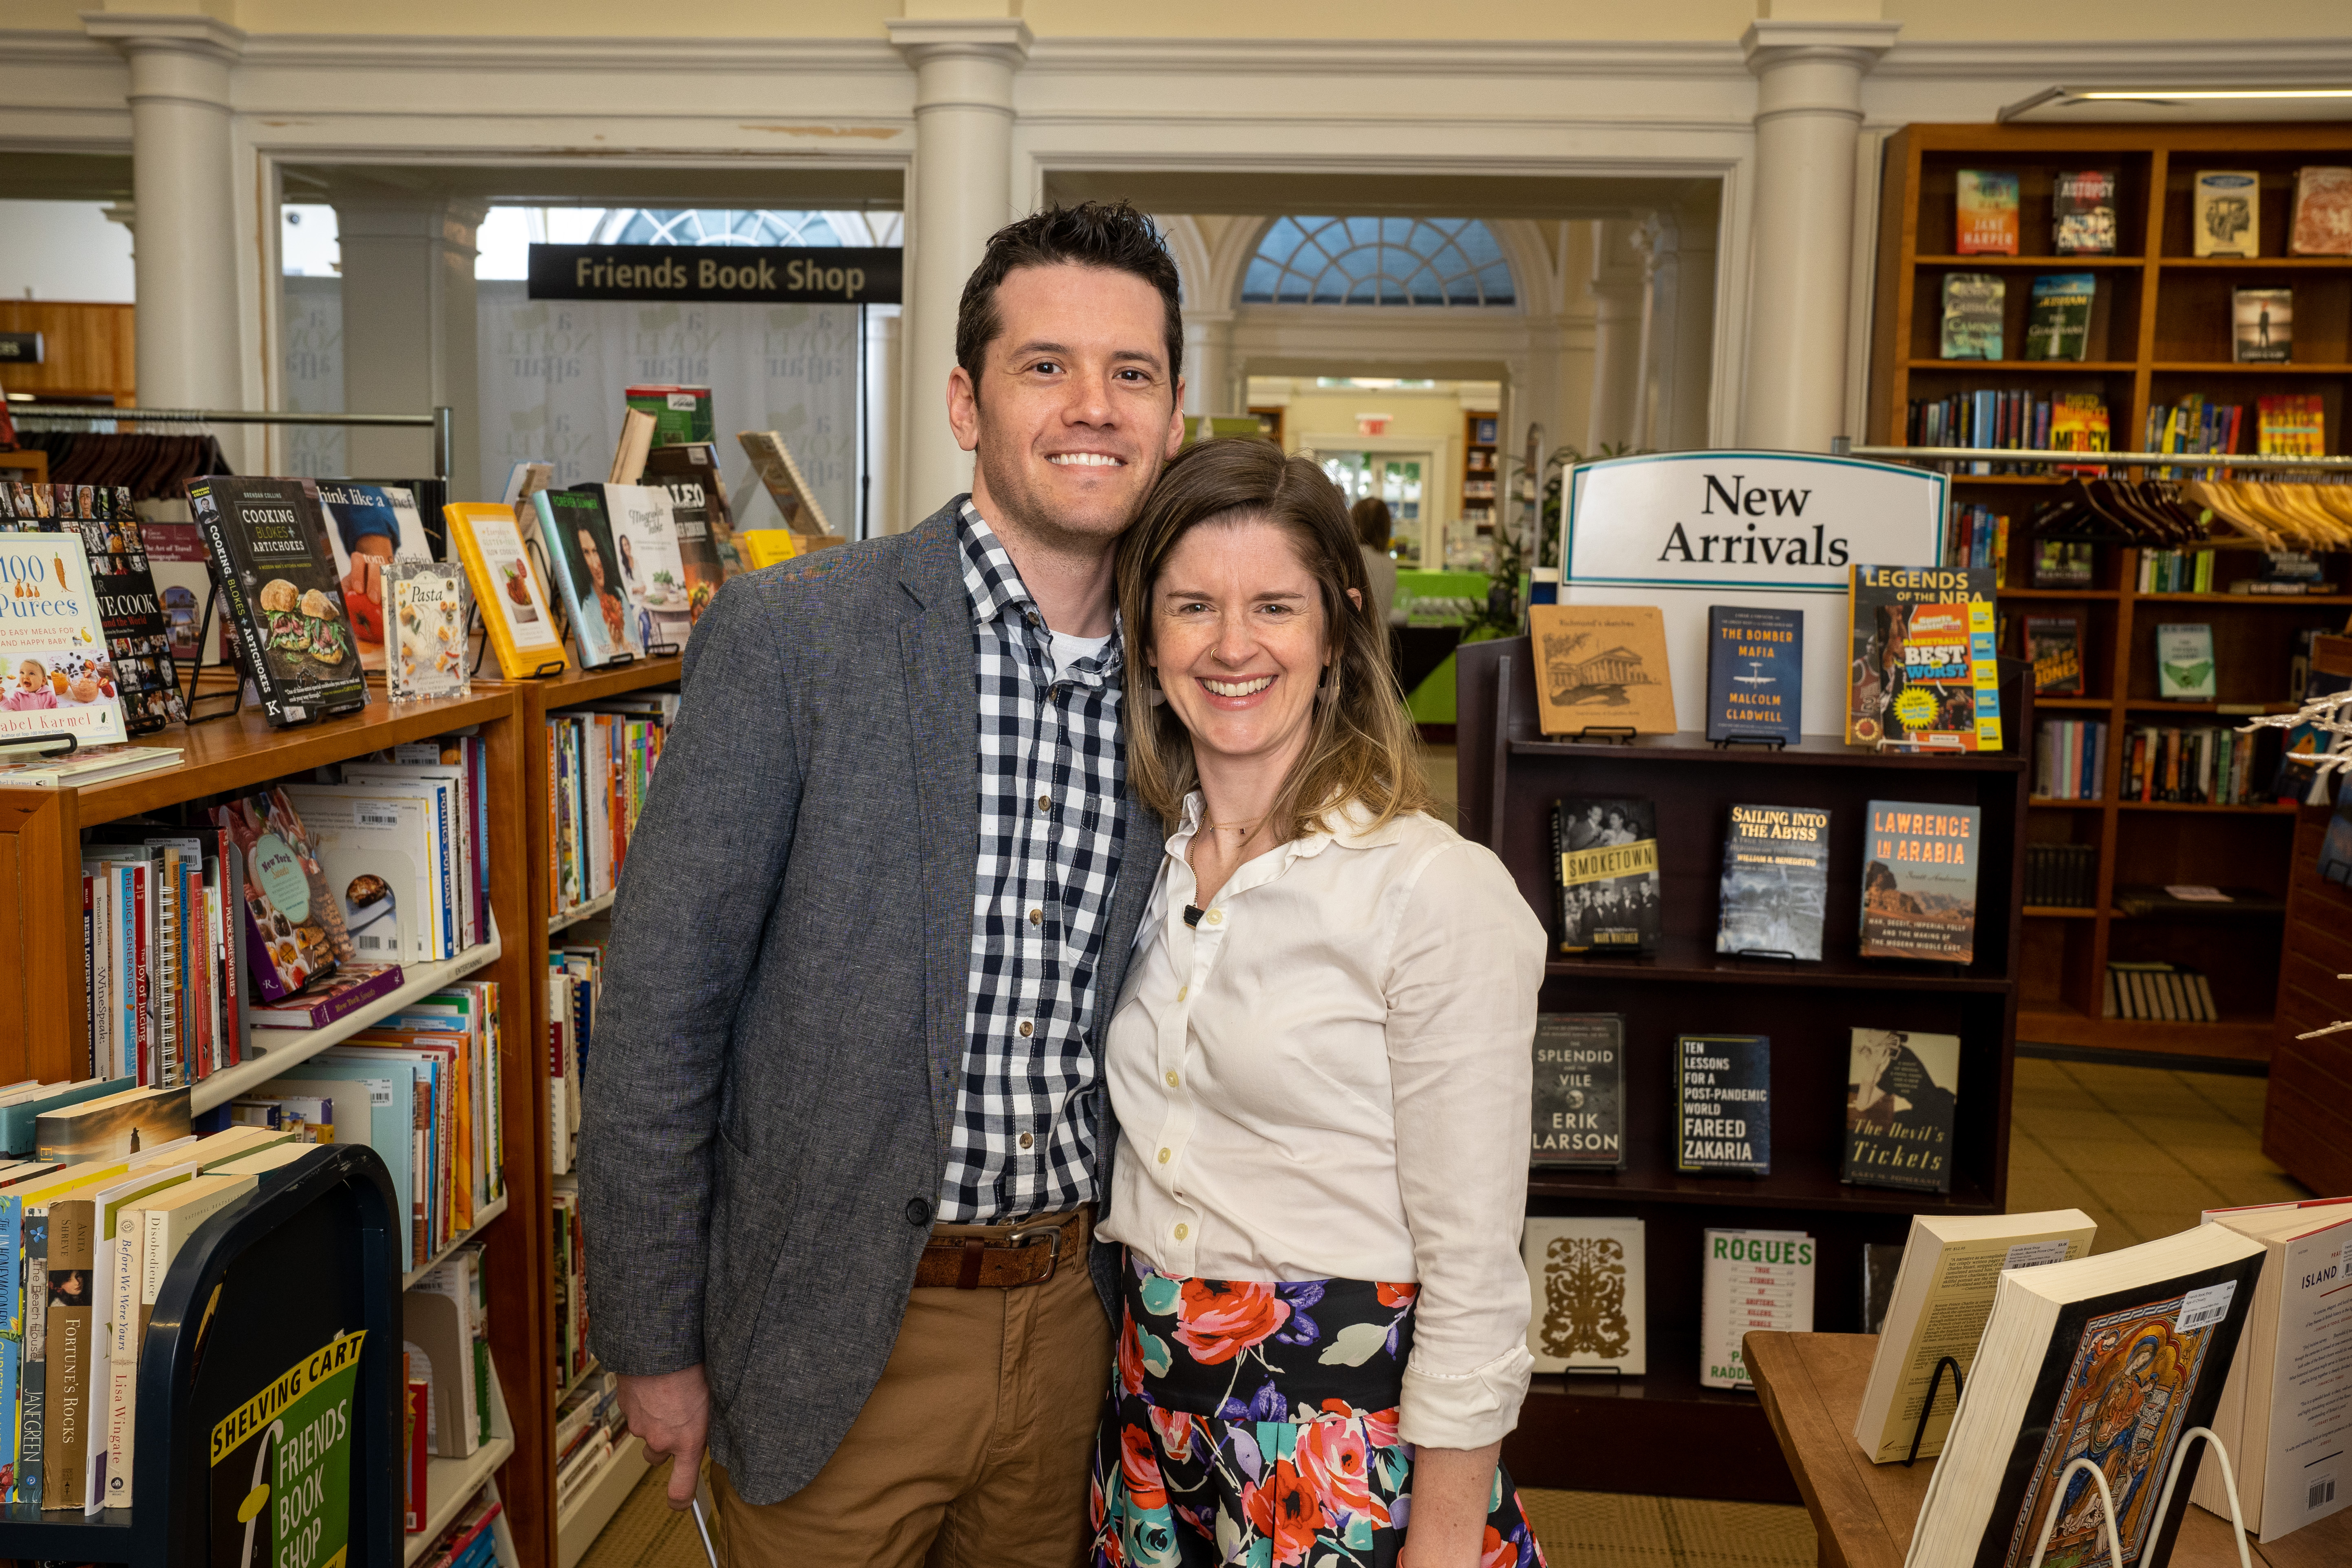 RJ and Erin in book shop.jpg